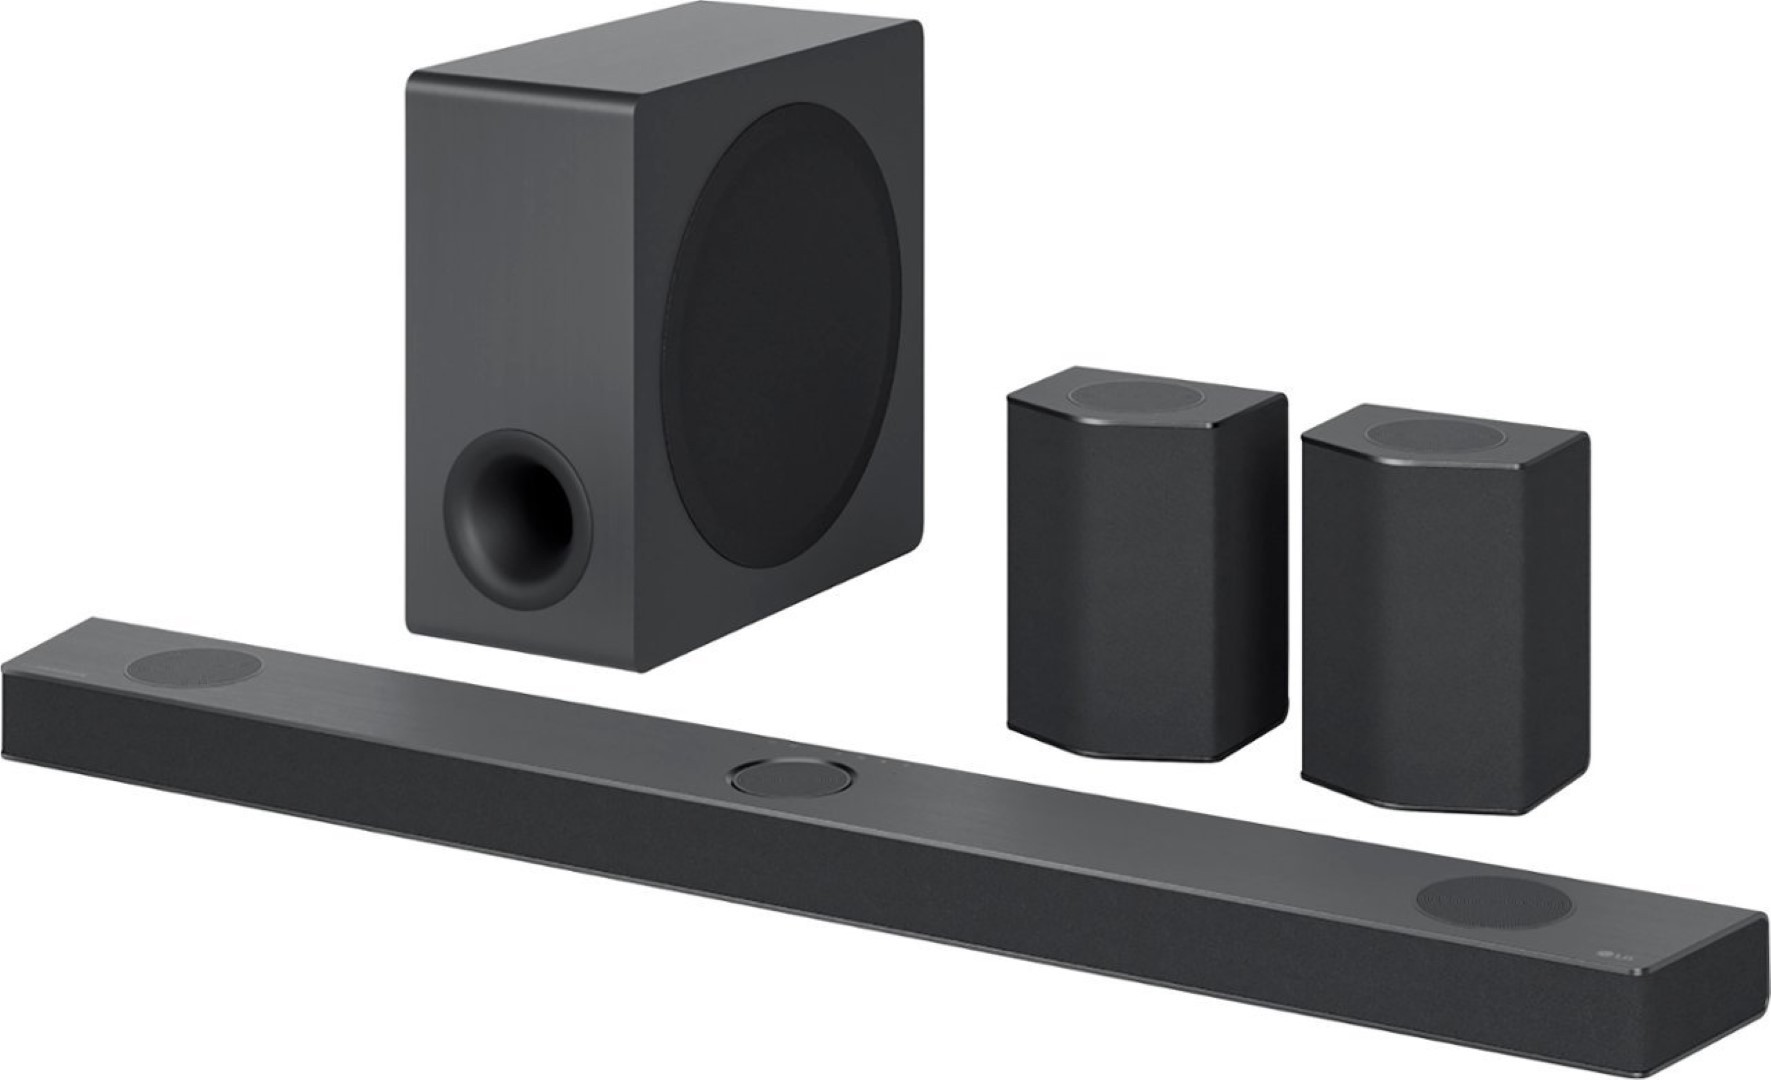 LG 9.1.5 Channel Soundbar with Wireless Subwoofer Dolby Atmos and DTS:X S95QR OB